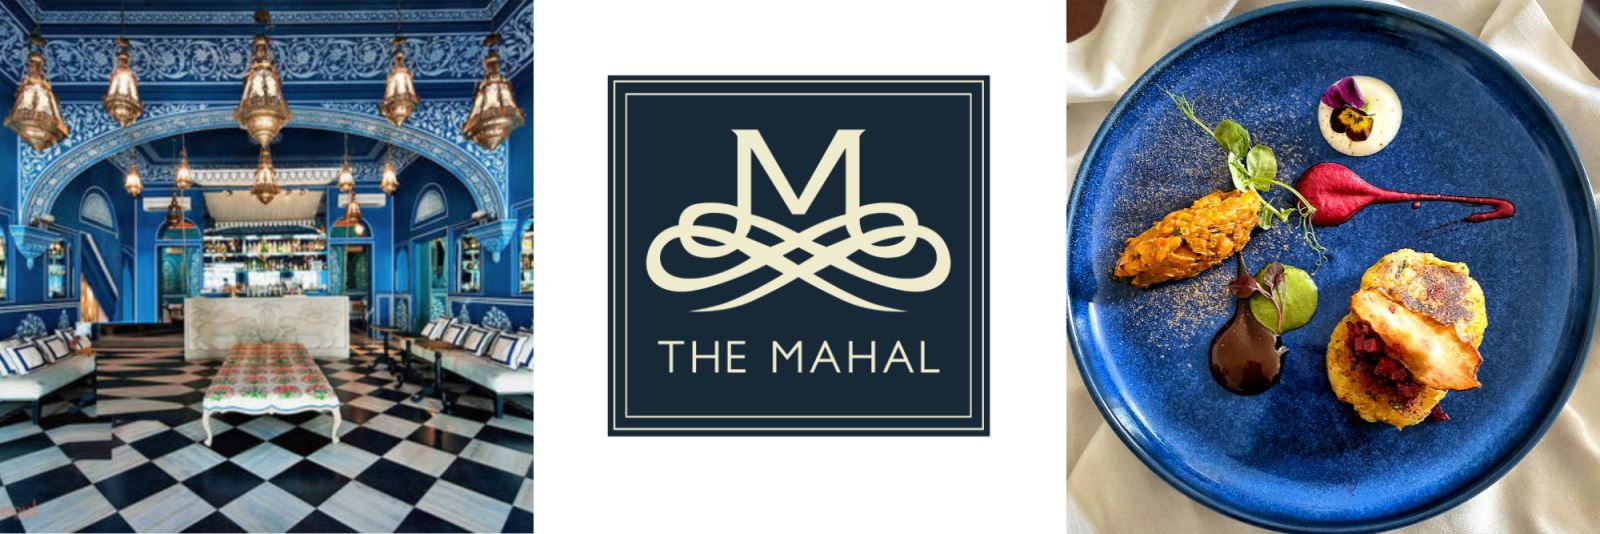 Selection of images - interior of Mahal, Mahal's logo and delicious food.